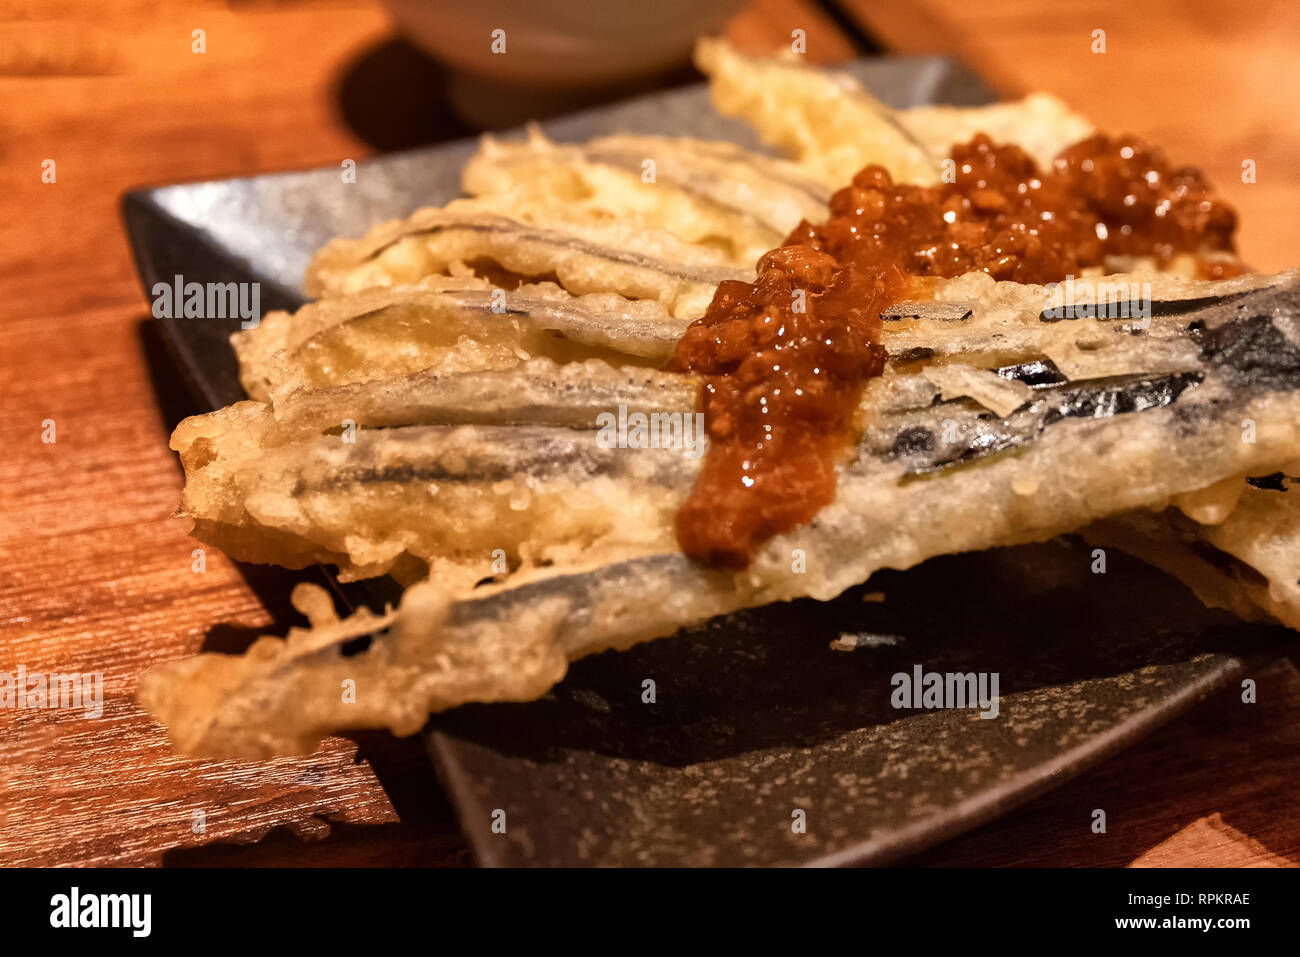 Eggplant tempura with topping at a Japanese restaurant Stock Photo